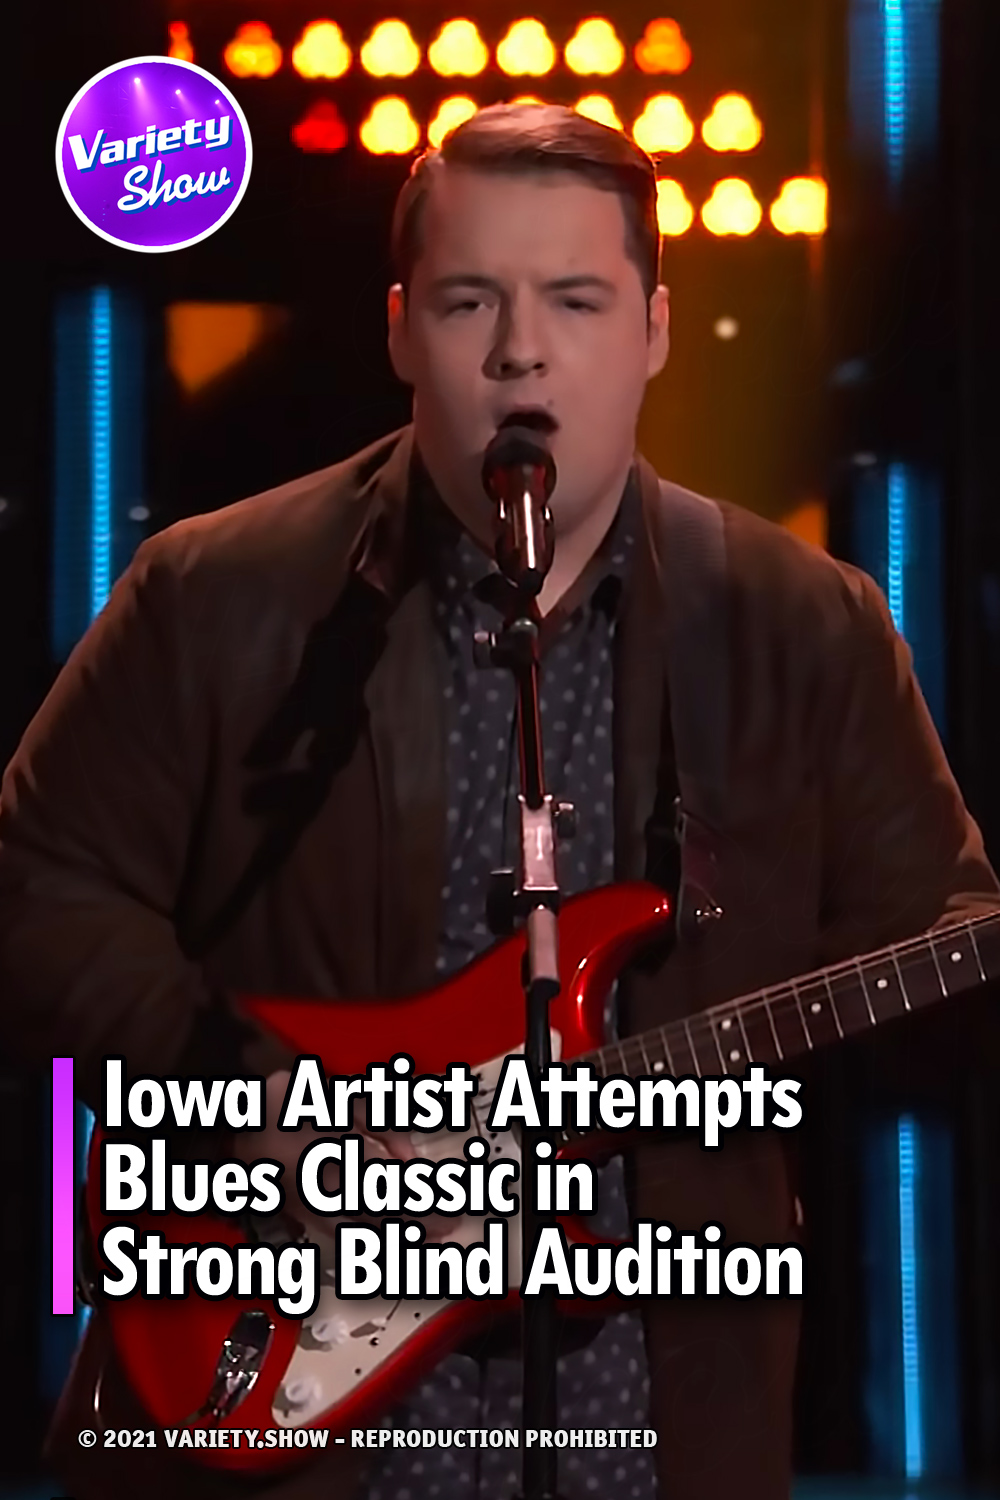 Iowa Artist Attempts Blues Classic in Strong Blind Audition